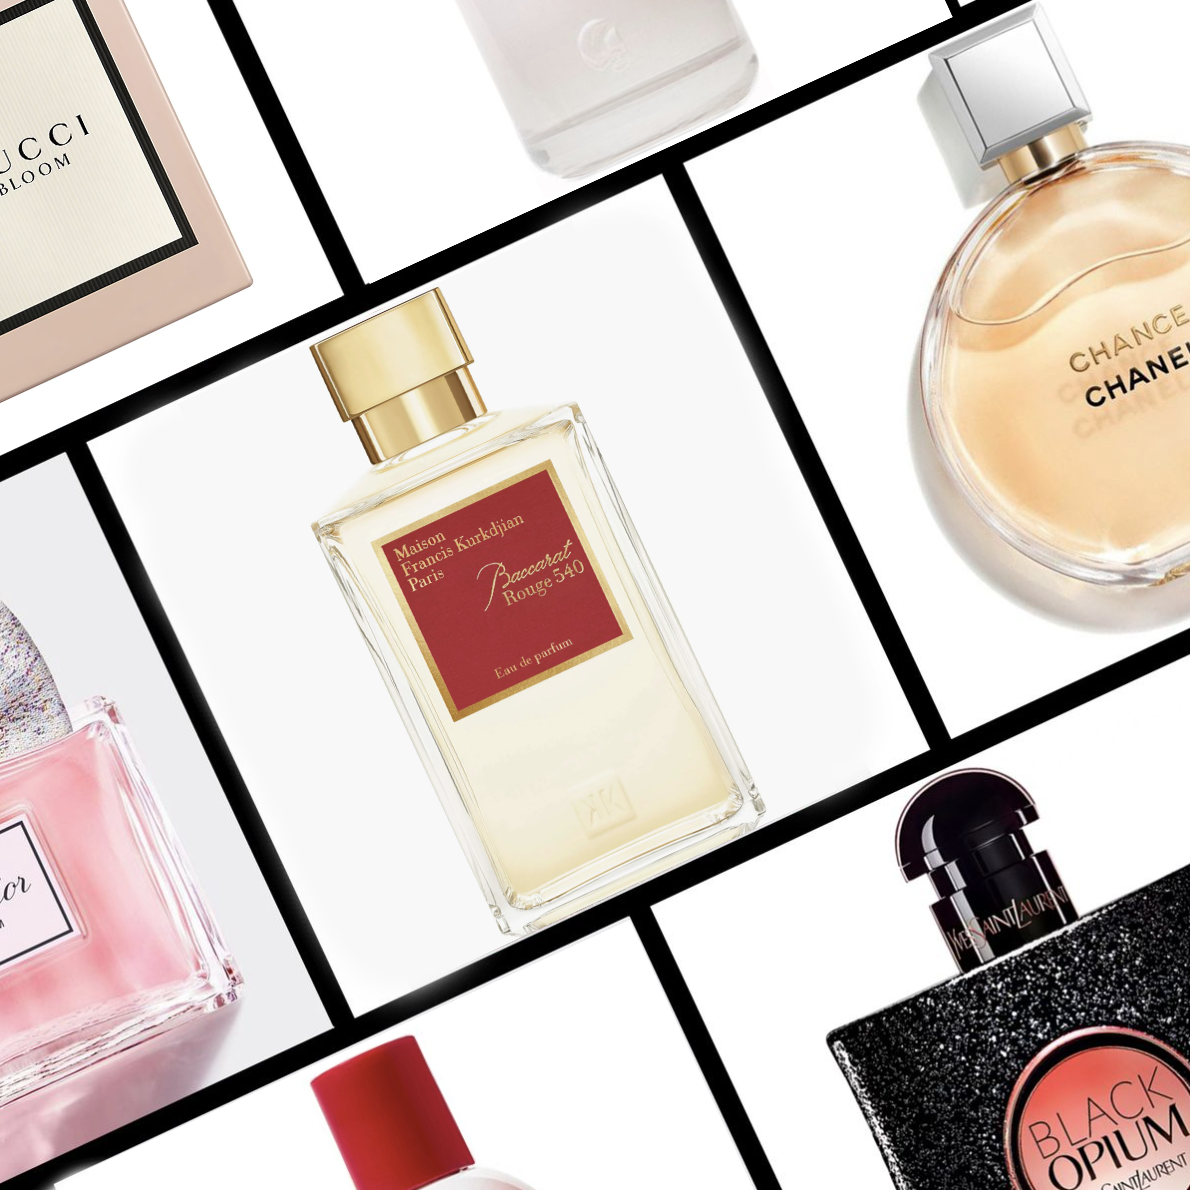 15 Best Spring Perfumes to Make You Feel Fresh And Delighted